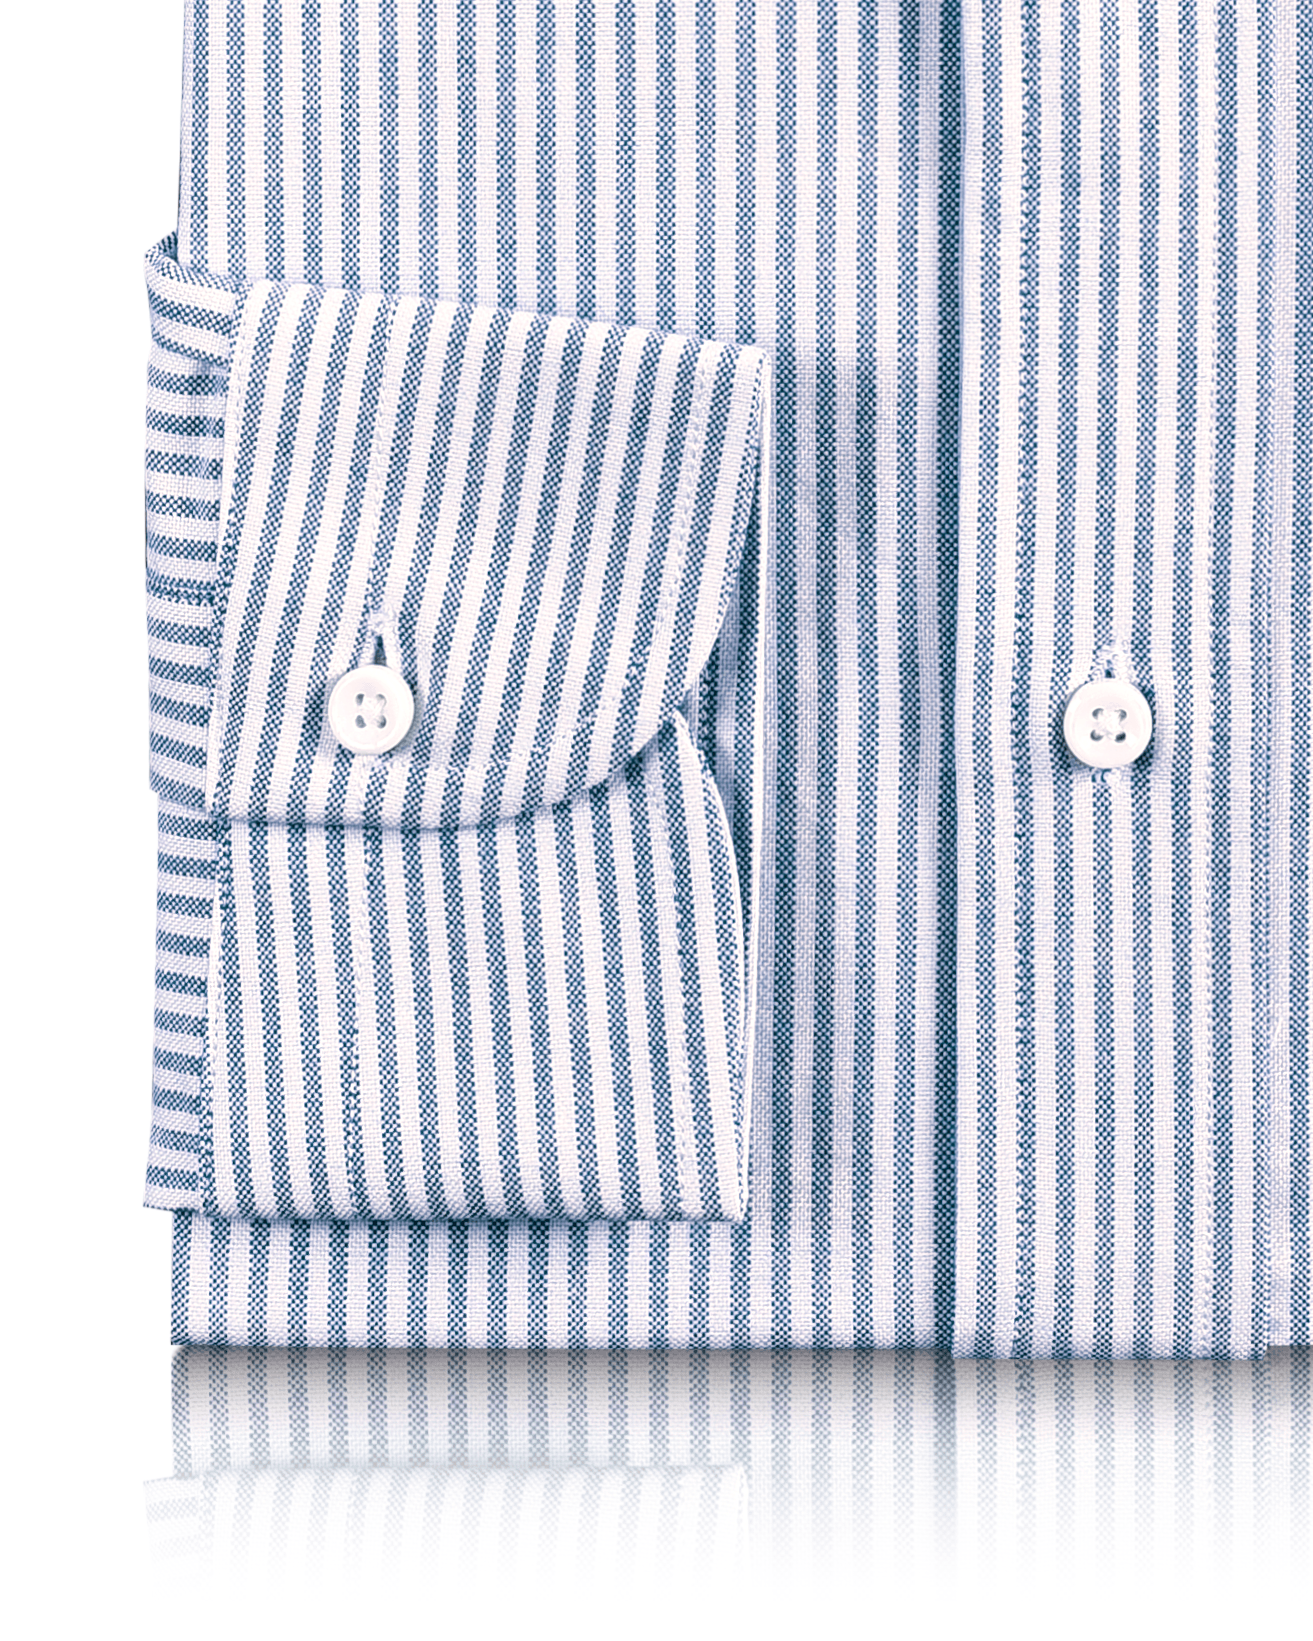 Cuff of the custom oxford shirt for men by Luxire in white with blue university stripes